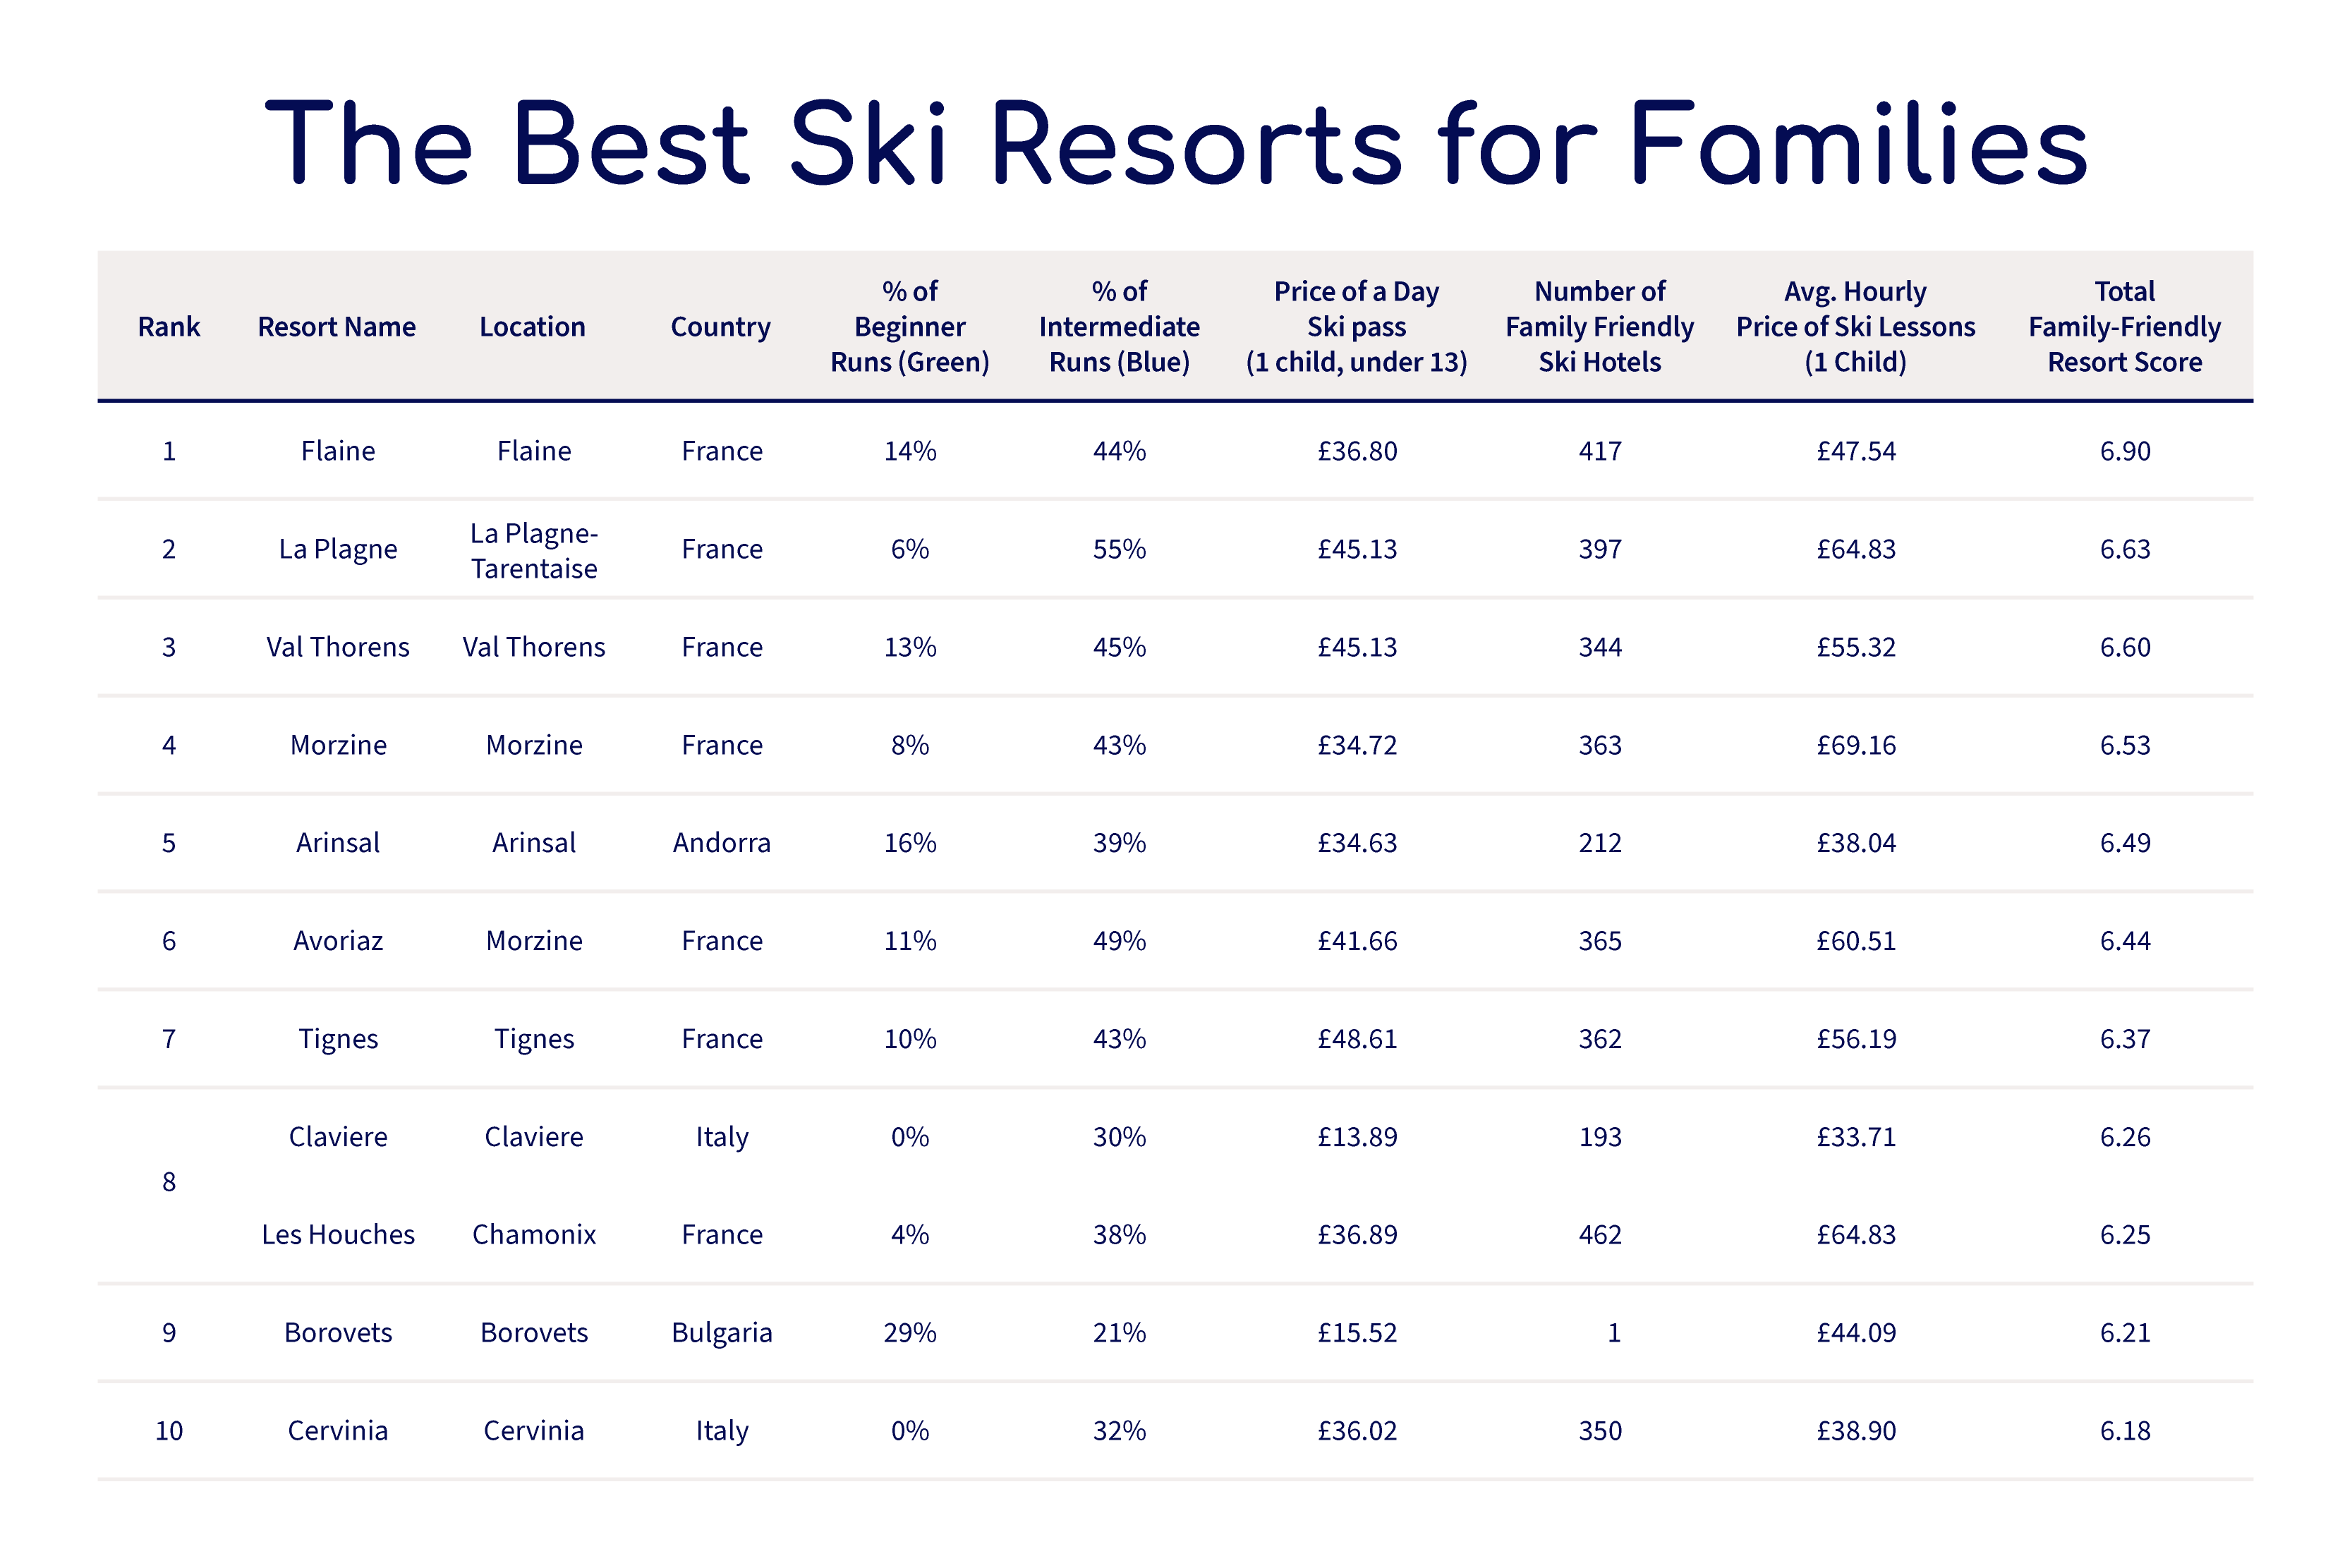 The Best Ski Resorts for Families